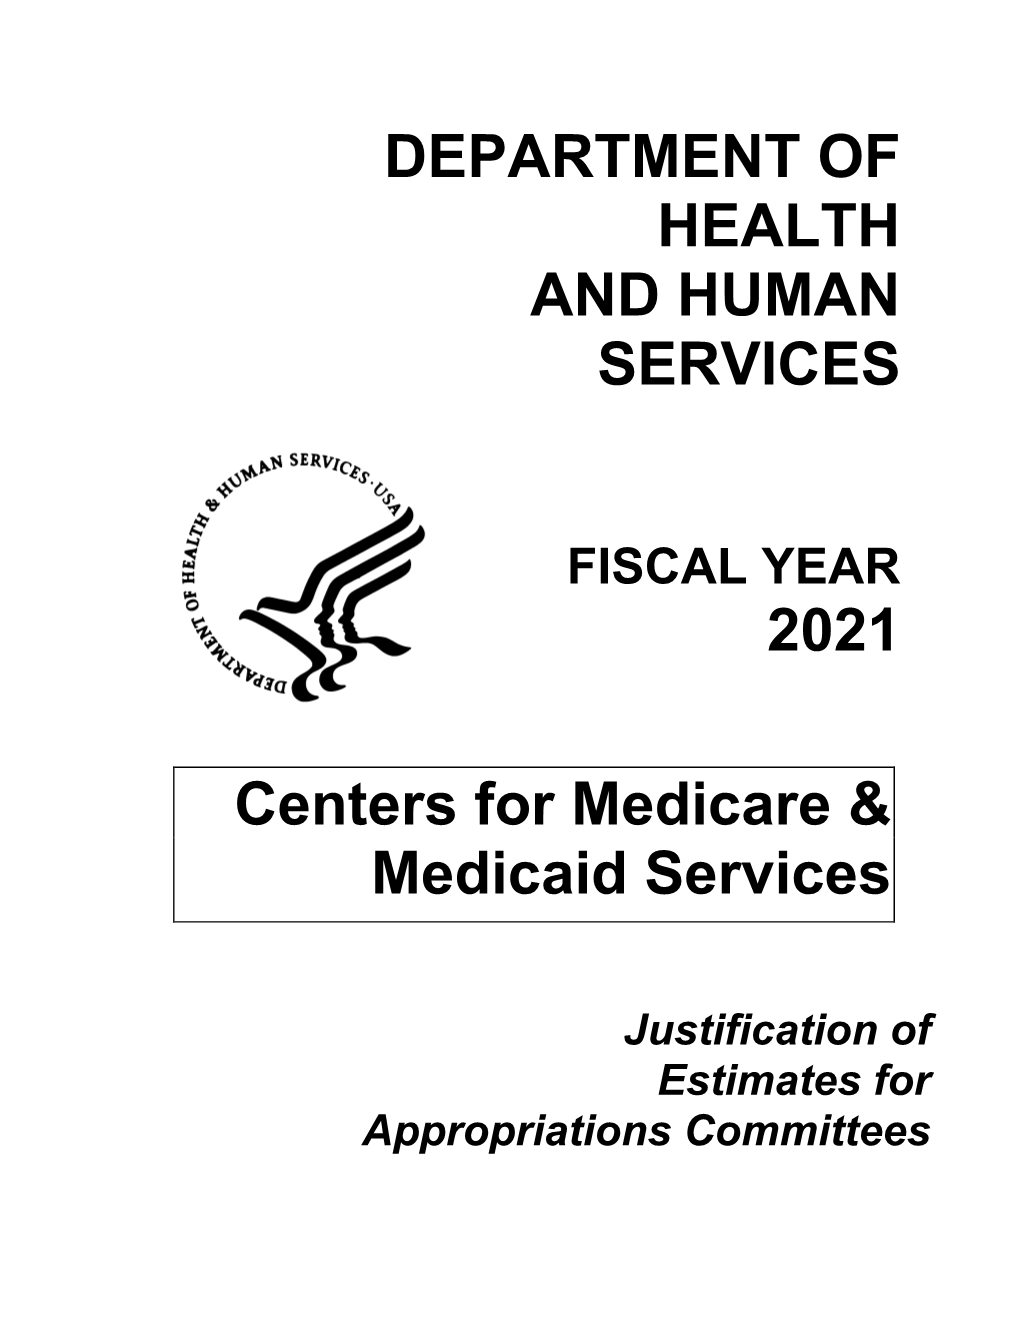 Department of Health and Human Services Congressional Justification